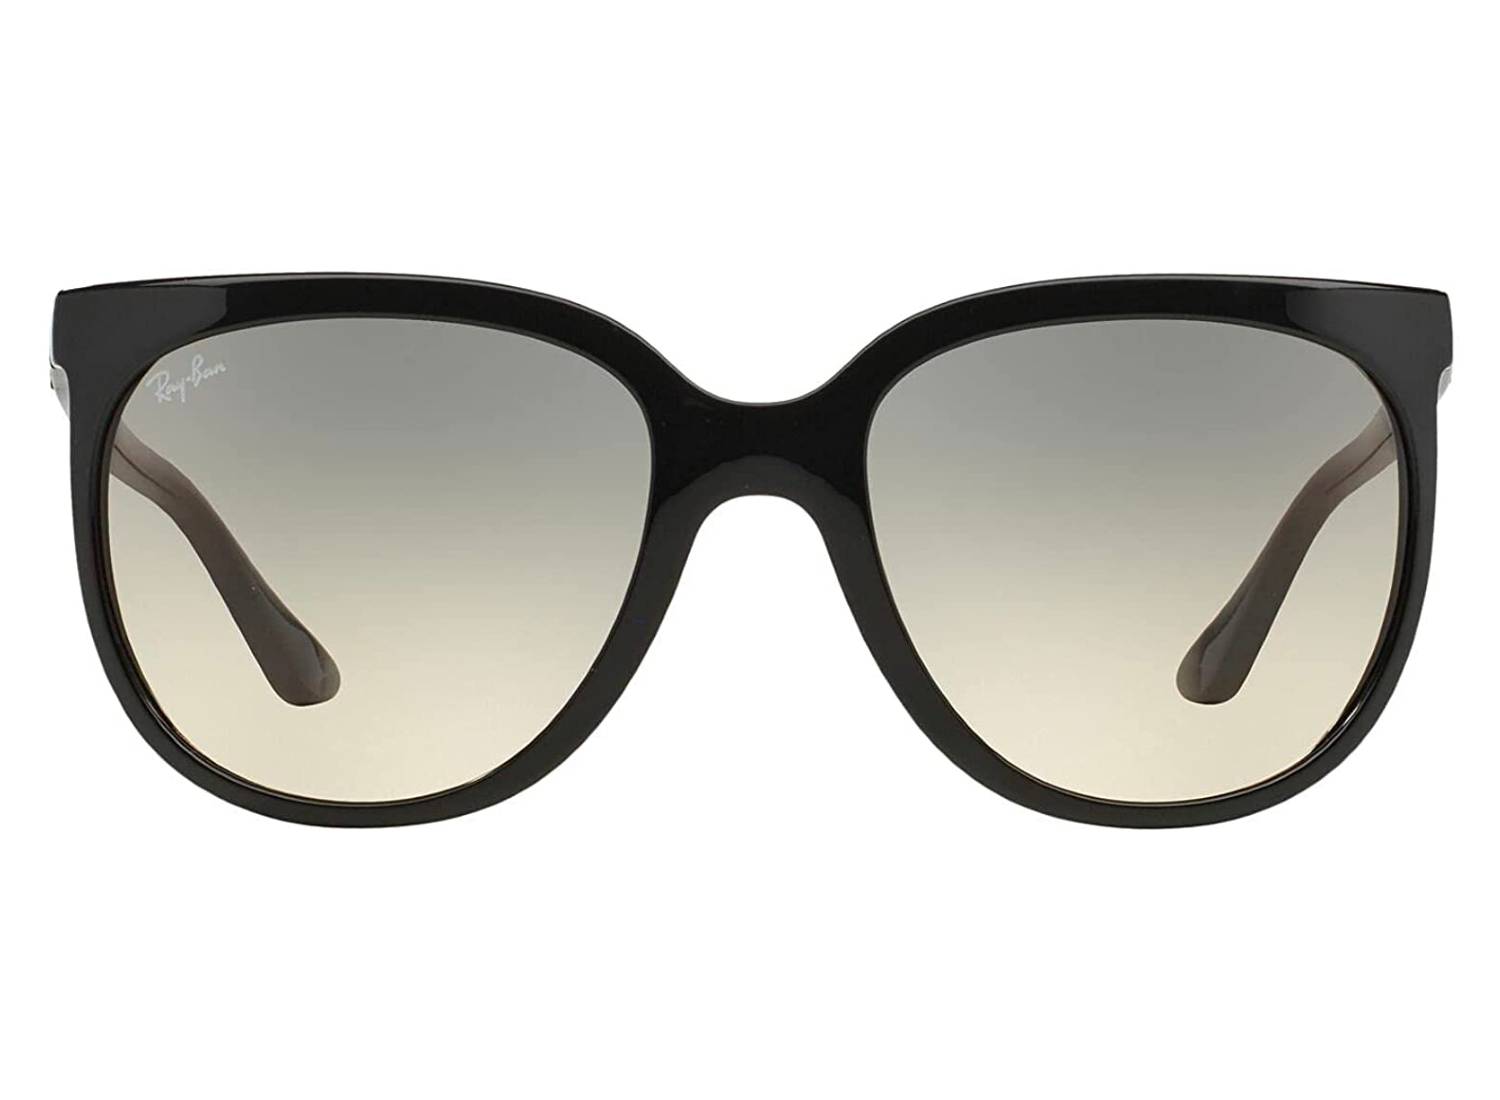 A pair of black Cats 1000 Ray-Ban Sunglasses with a black frame and gradient grey lenses